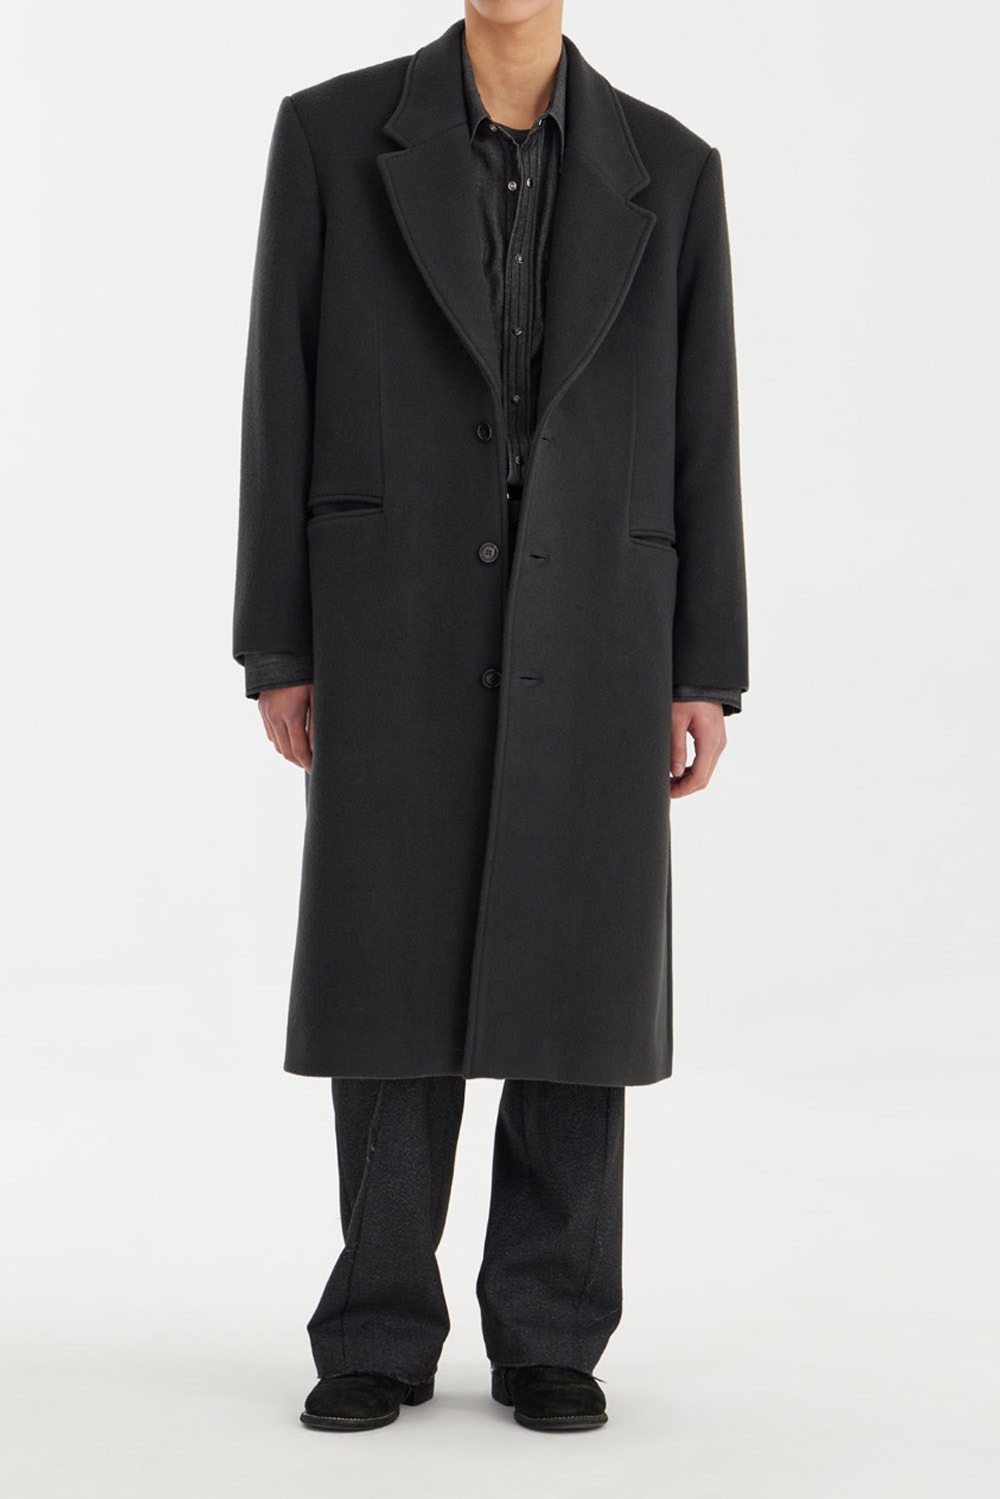 Chesterfield Coat - Charcoal Grey